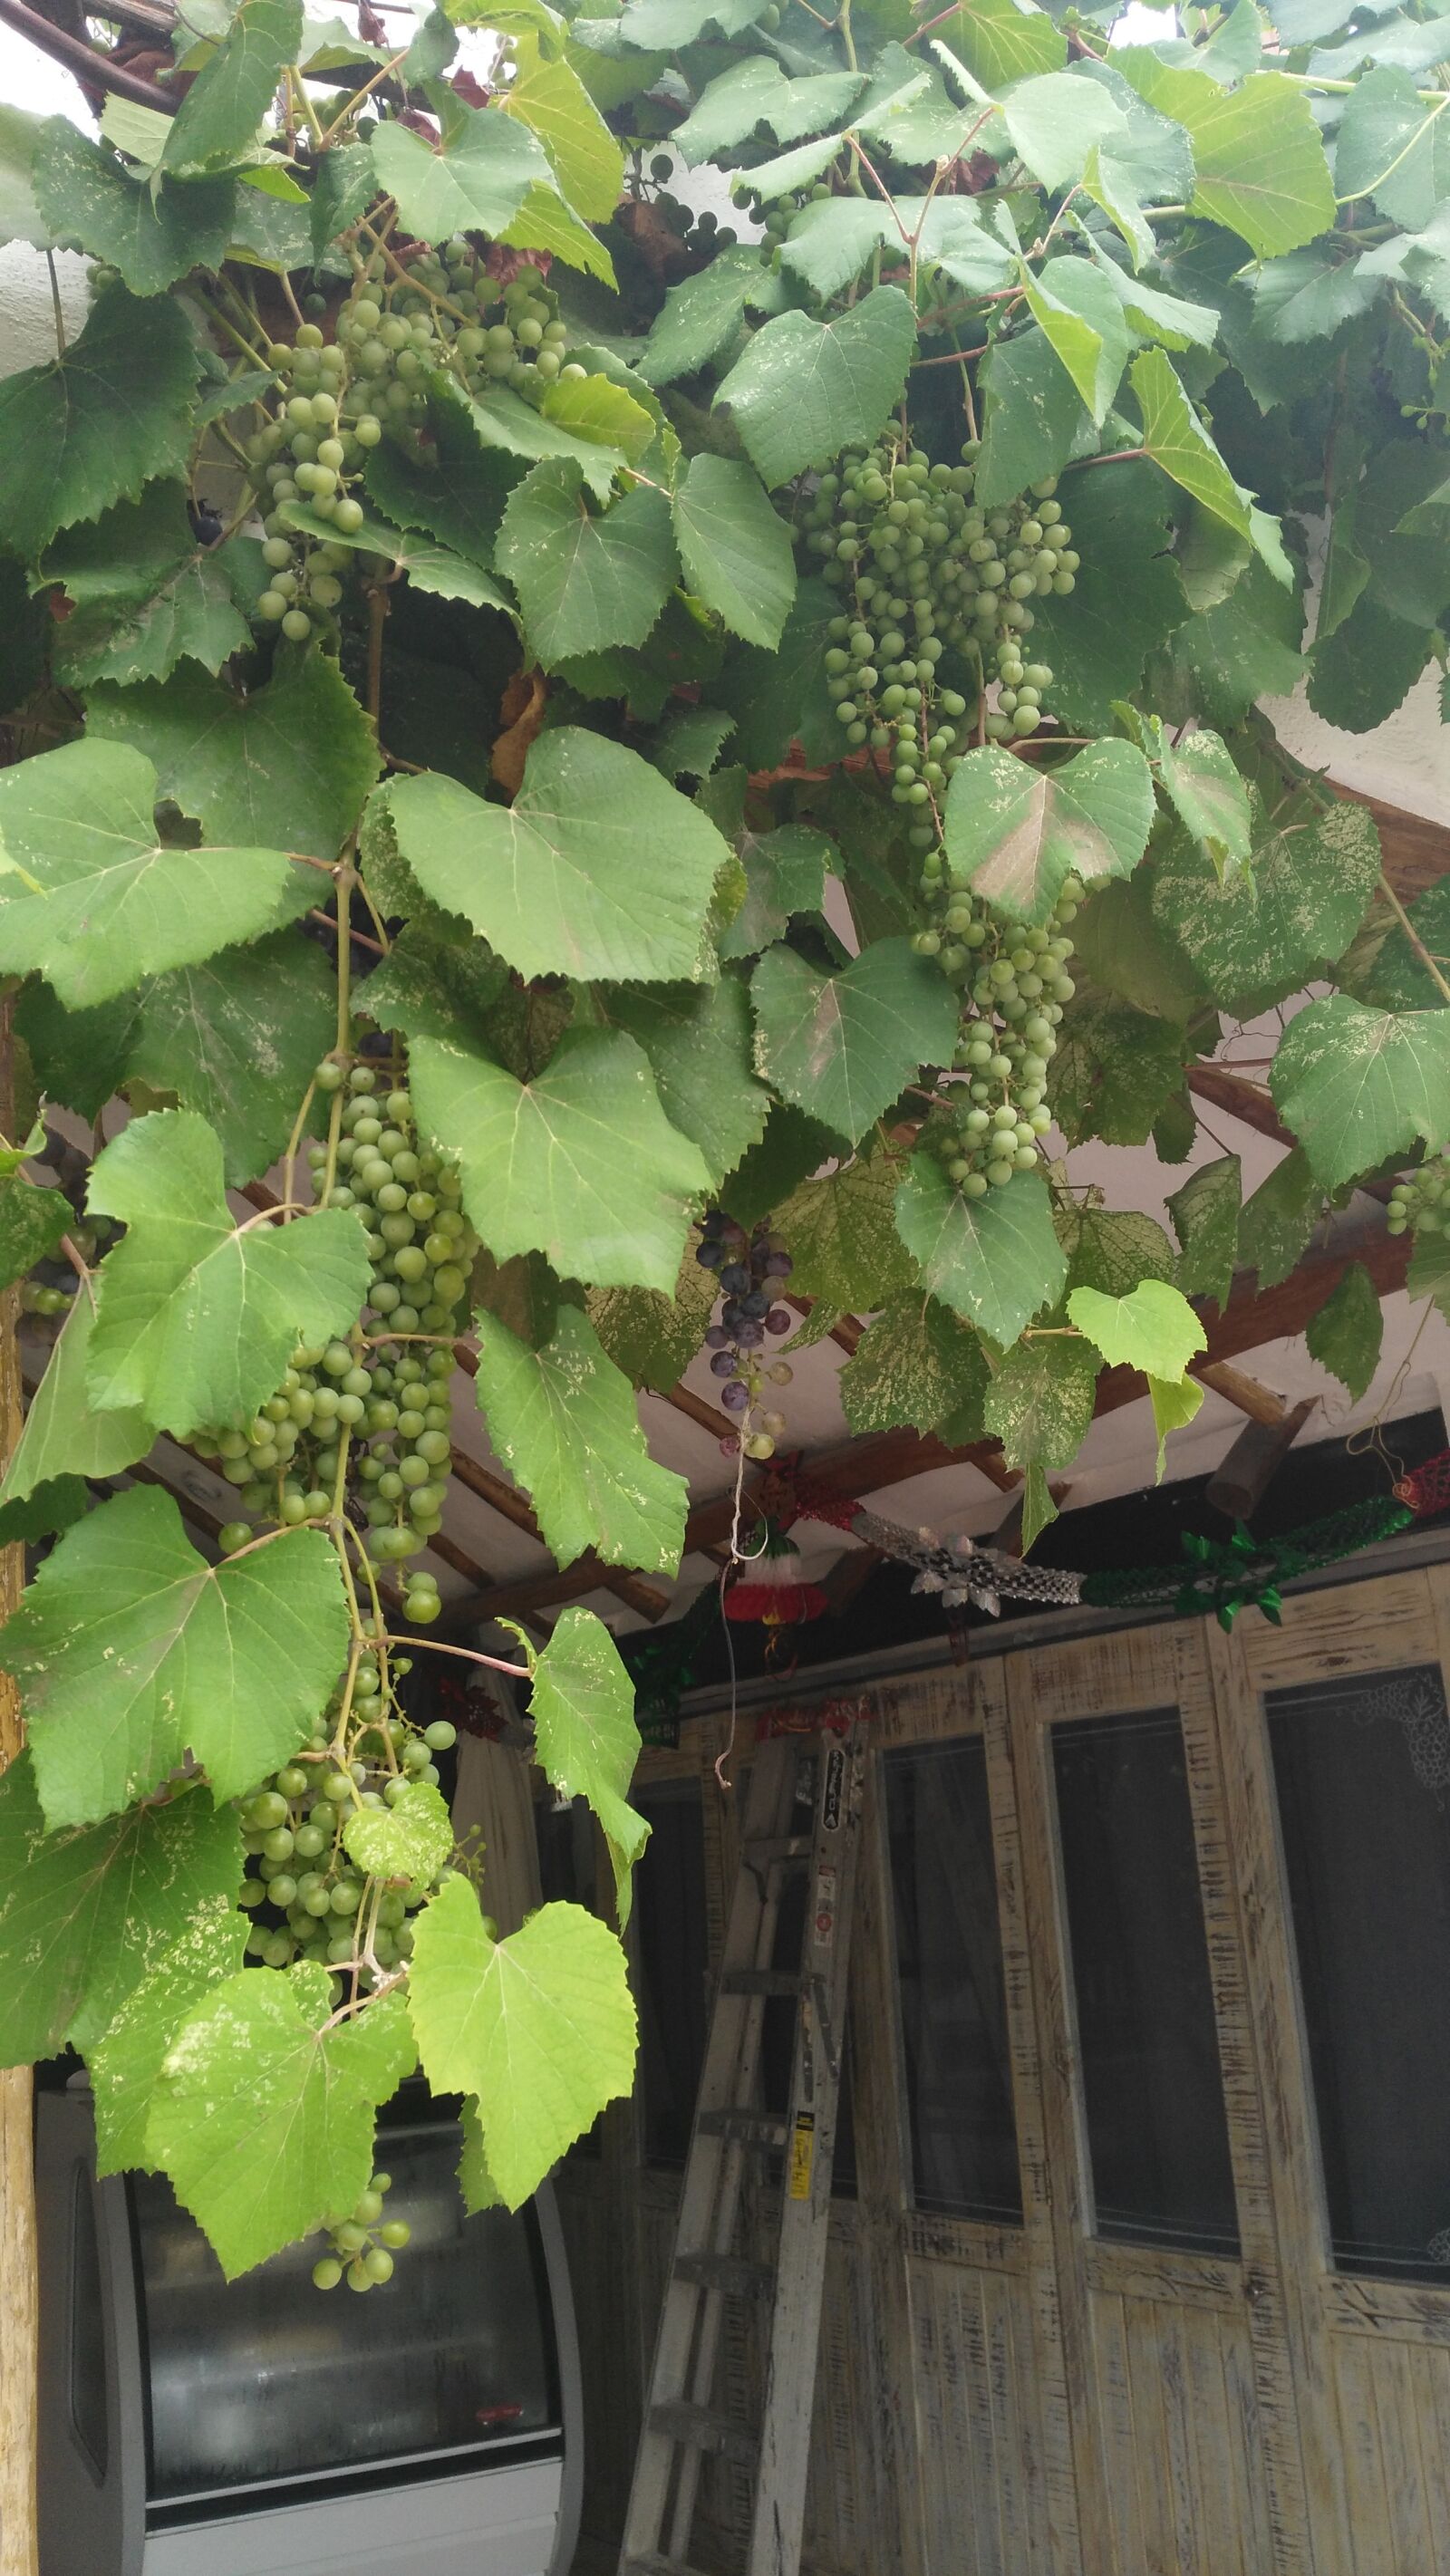 HUAWEI G7-L03 sample photo. Grapes, town, fruit photography